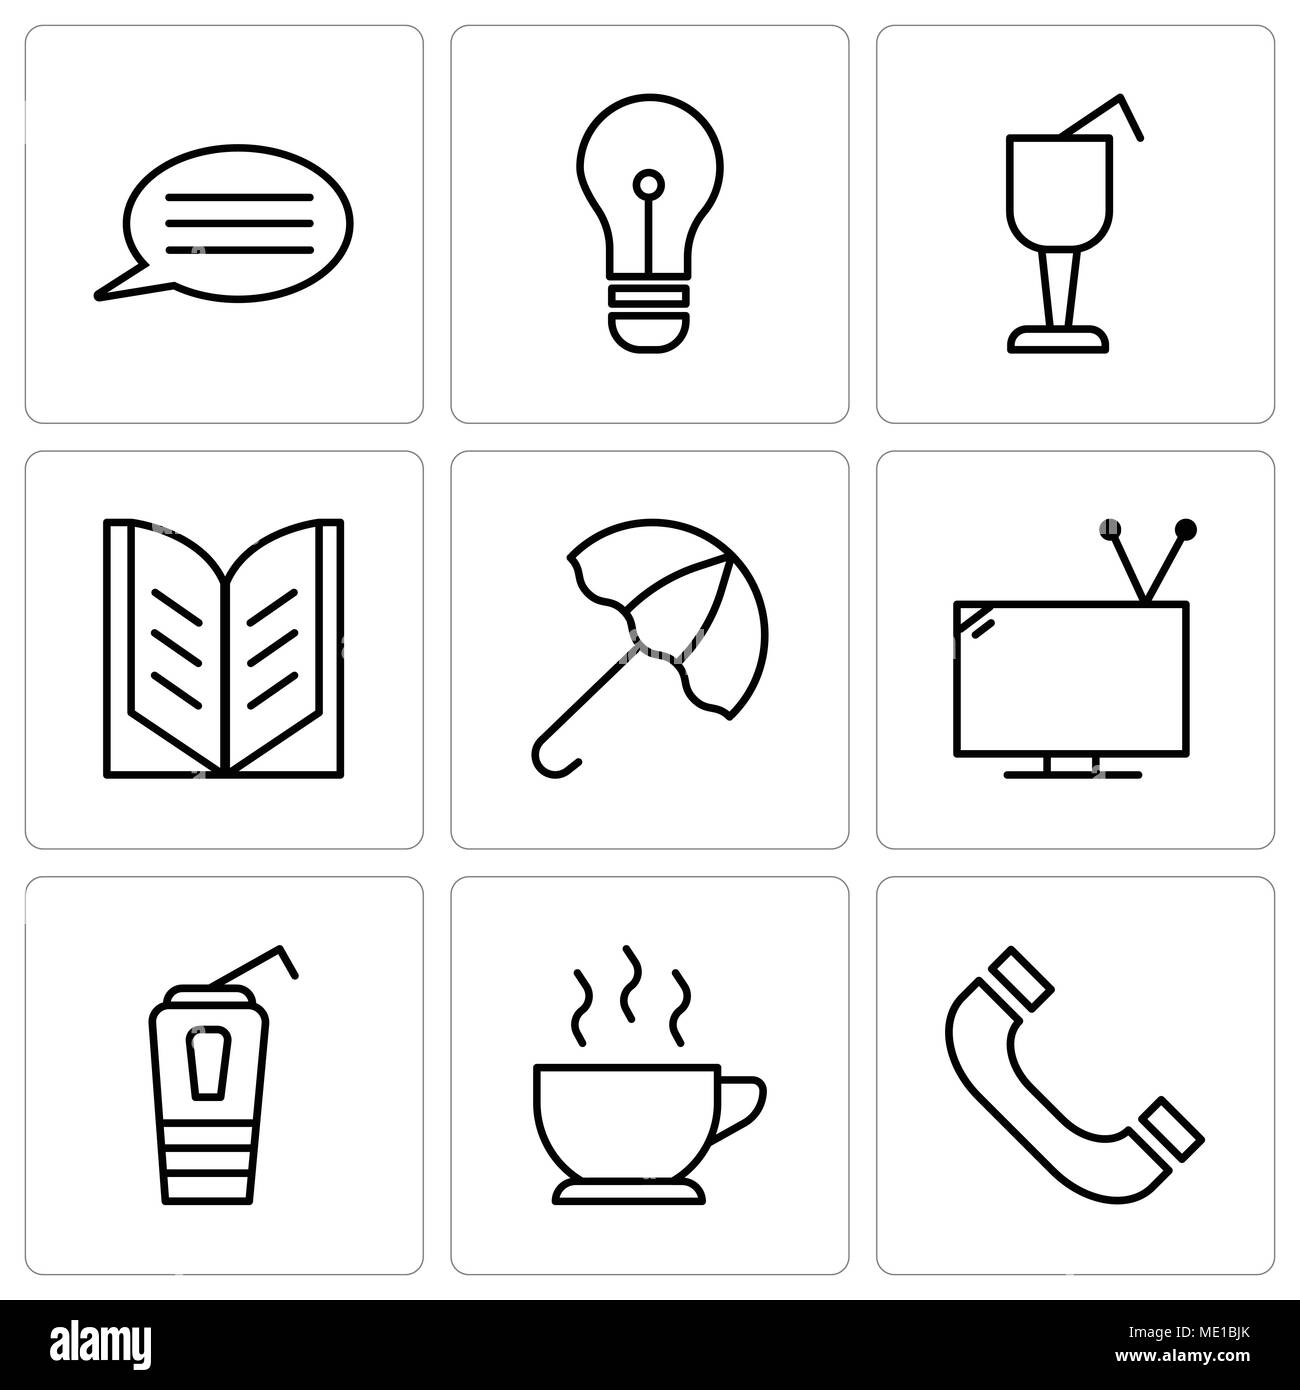 Set Of 9 simple editable icons such as Headphones, Cup of hot coffee, Paper cup with a drinking straw, Television with antenna, Open umbrella, Open bo Stock Vector